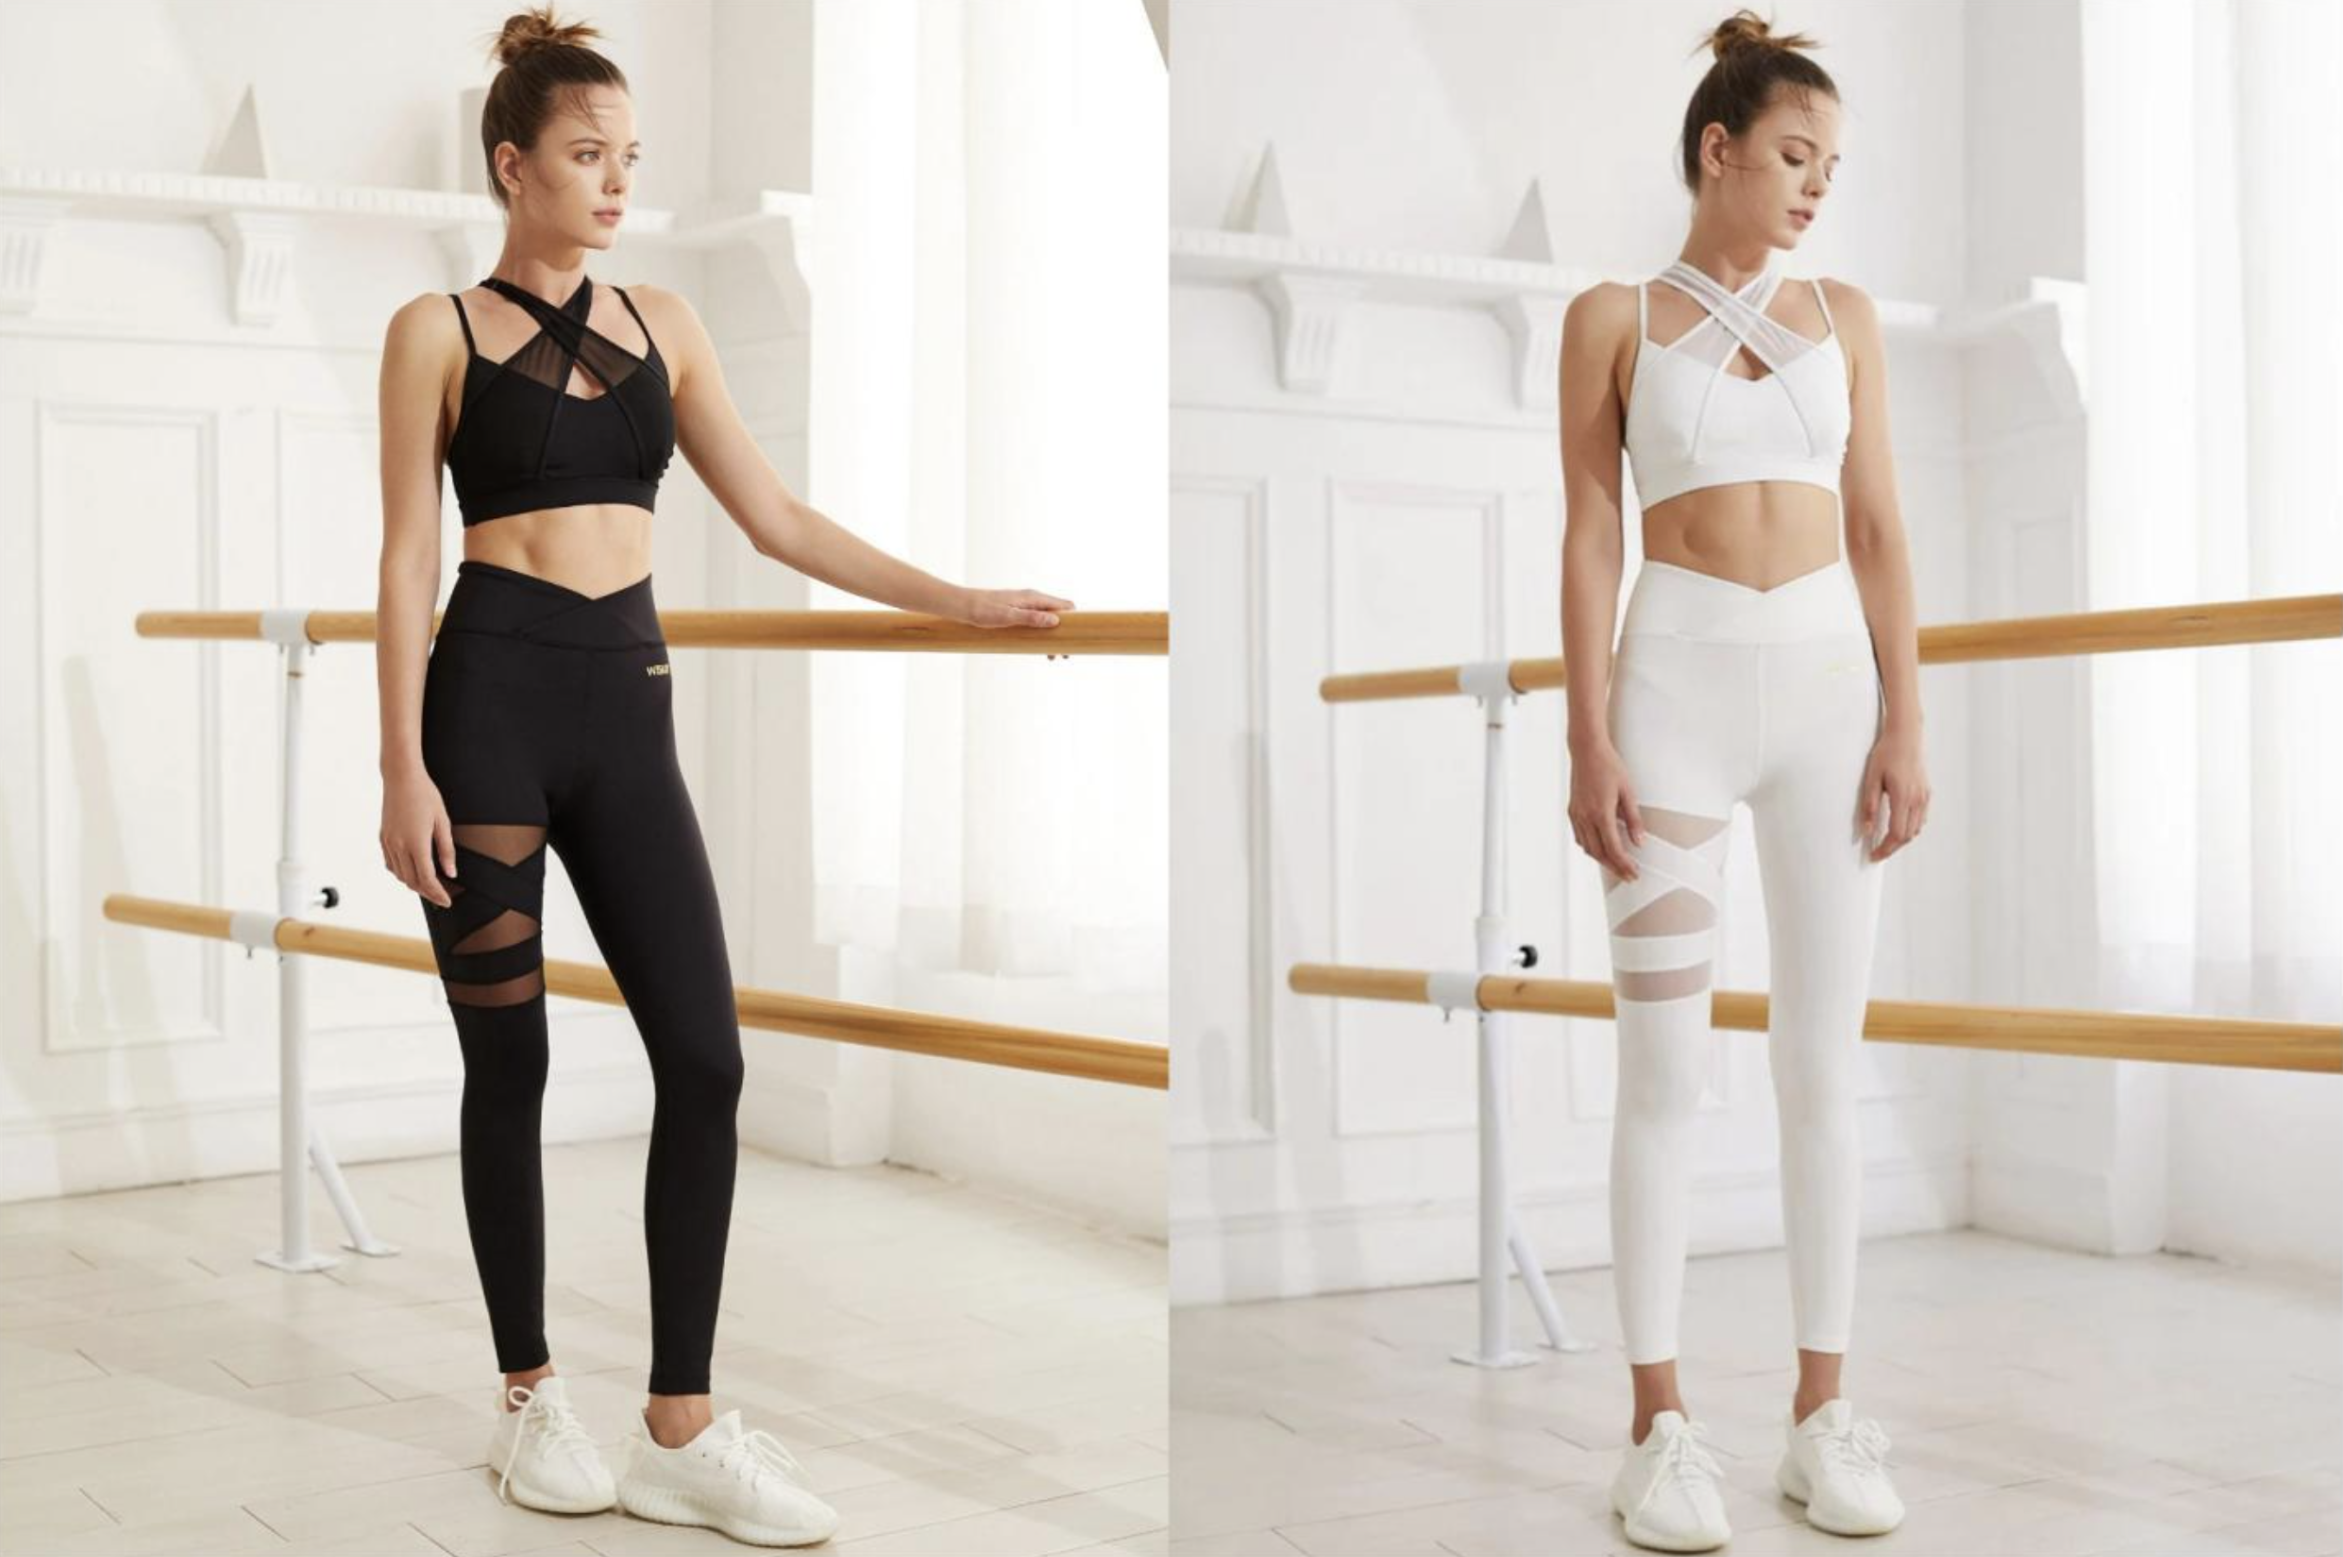 WISKII Active: Elevating Athleisure for Women